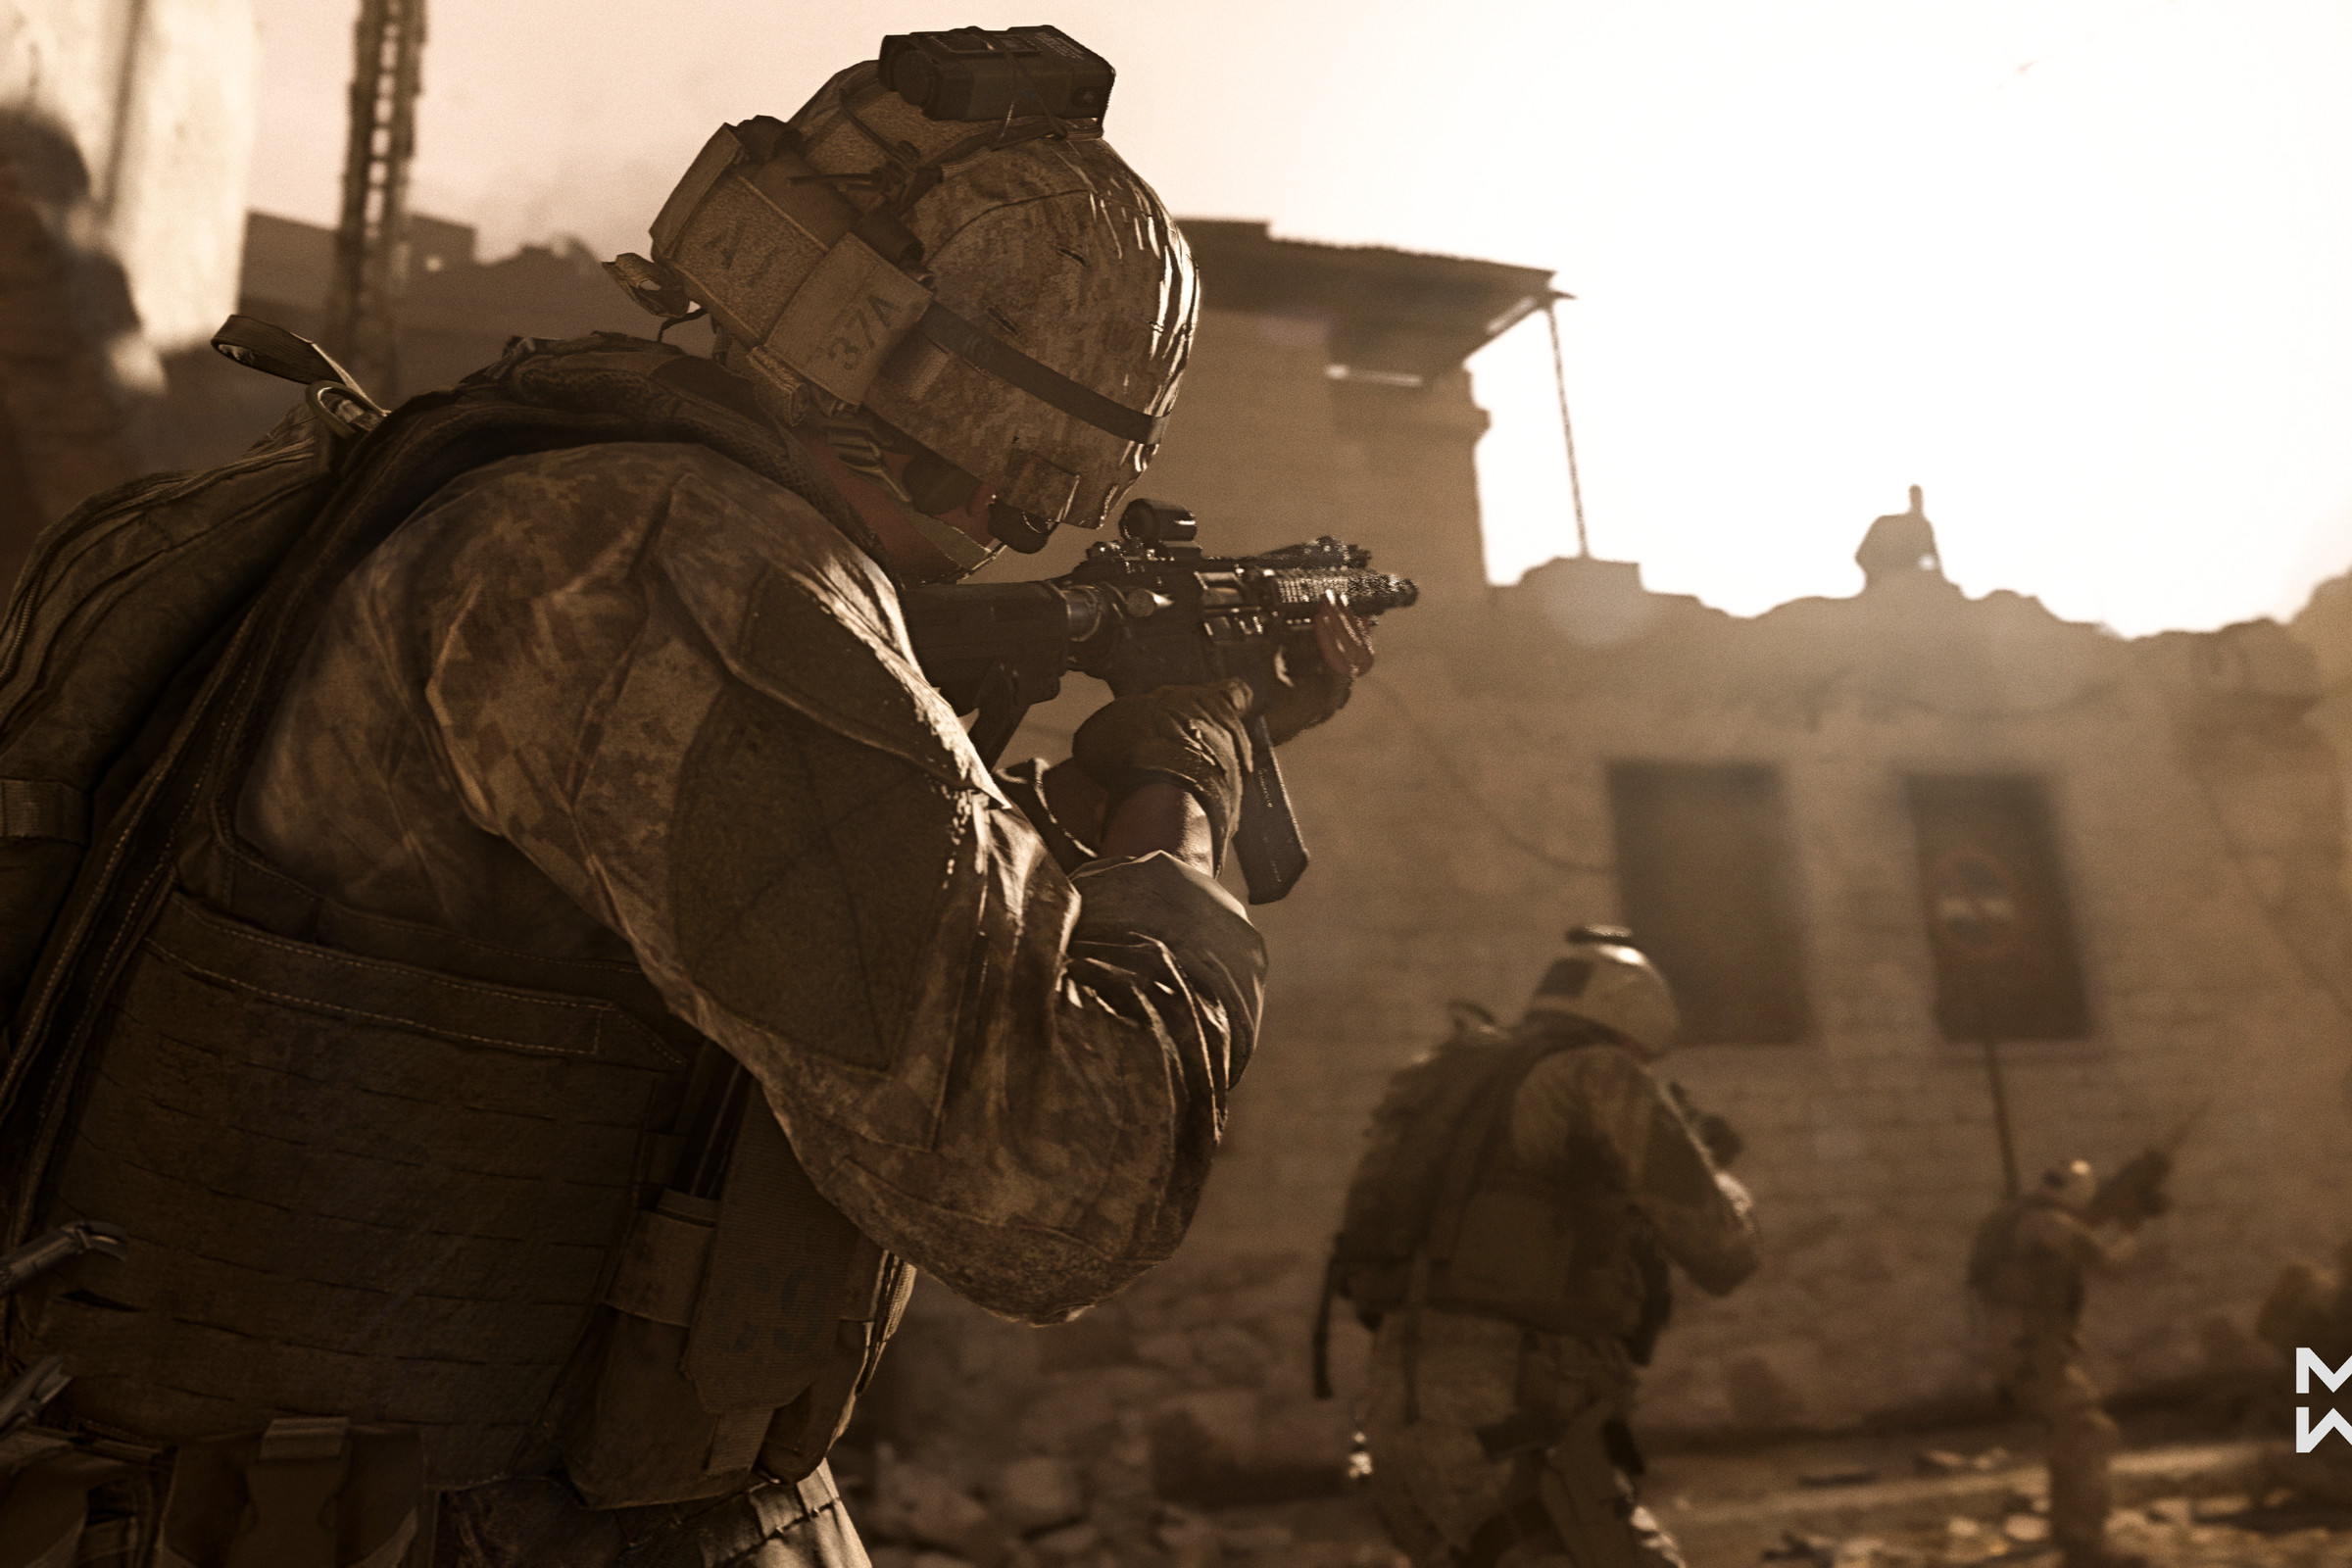 Promotional image from Call of Duty: Modern Warfare featuring a soldier in fatigues and helmet aiming a gun as a squad of soldiers patrol a bomb-out city street